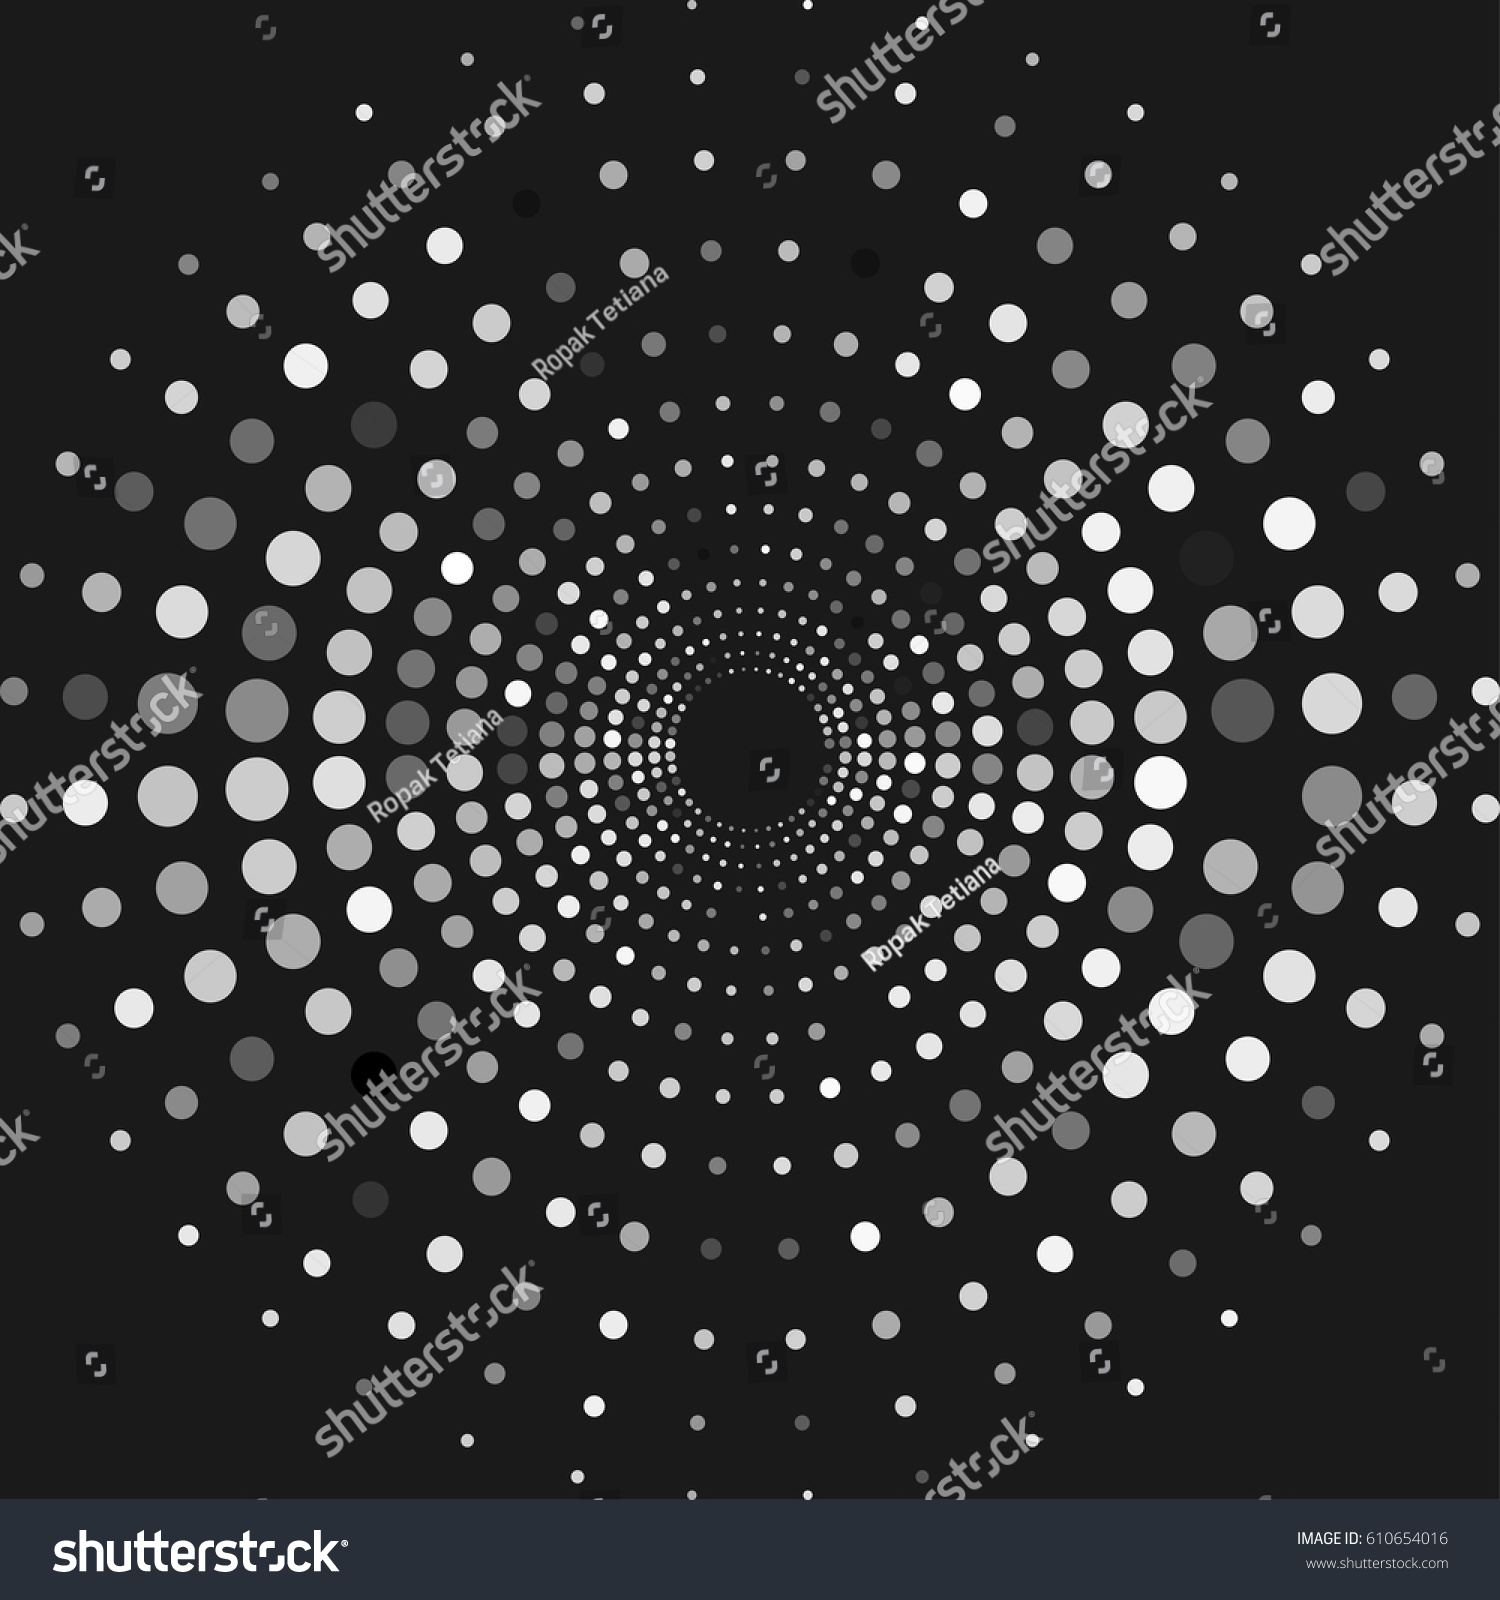 Edit Vectors Free Online - Circle with dots | Shutterstock Editor